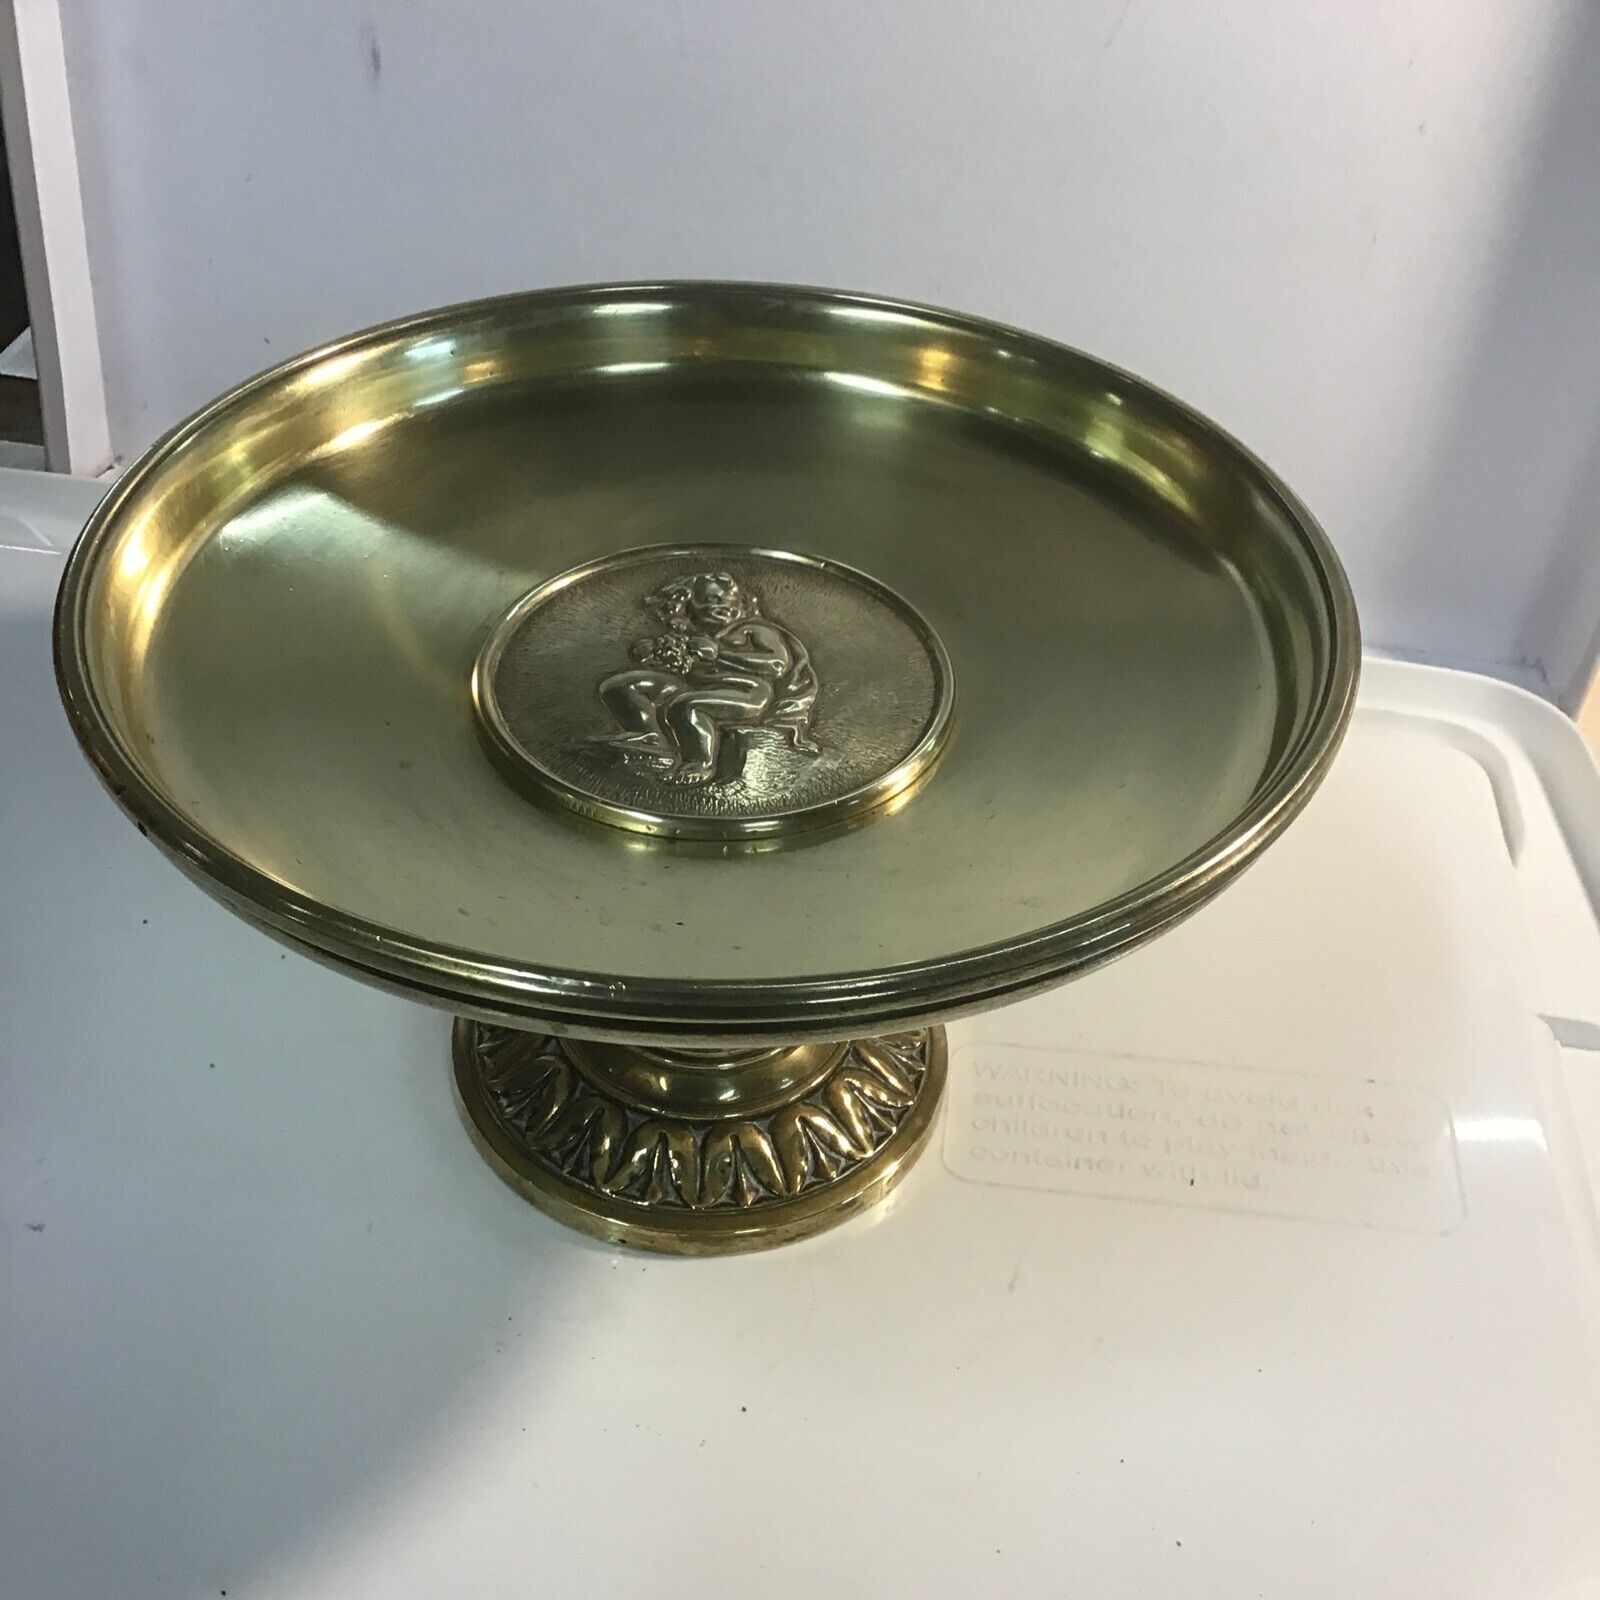 Vintage/Antique Brass Compote/ Tazza Child Image marked B D 682 weighs 6 pounds